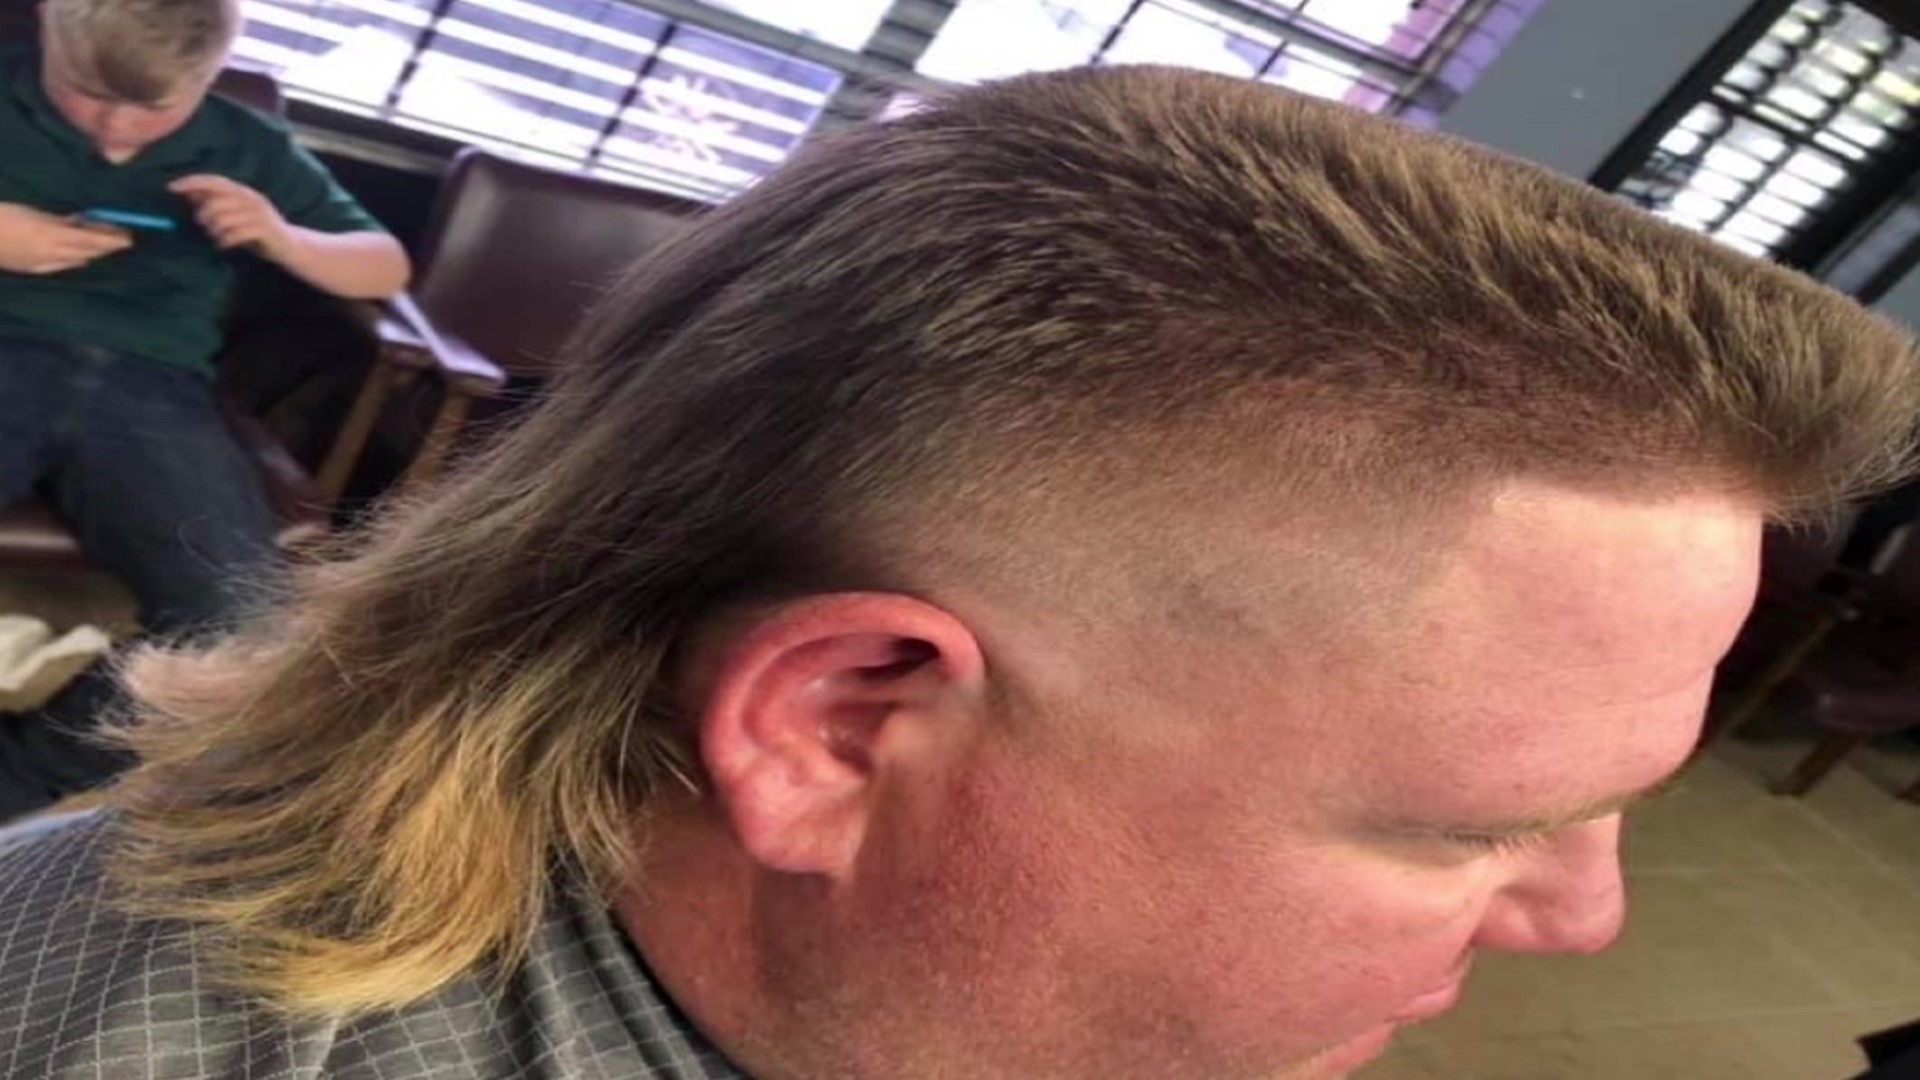 Nicholson residents are being asked to stop begging barbers for haircuts, and try a new style.